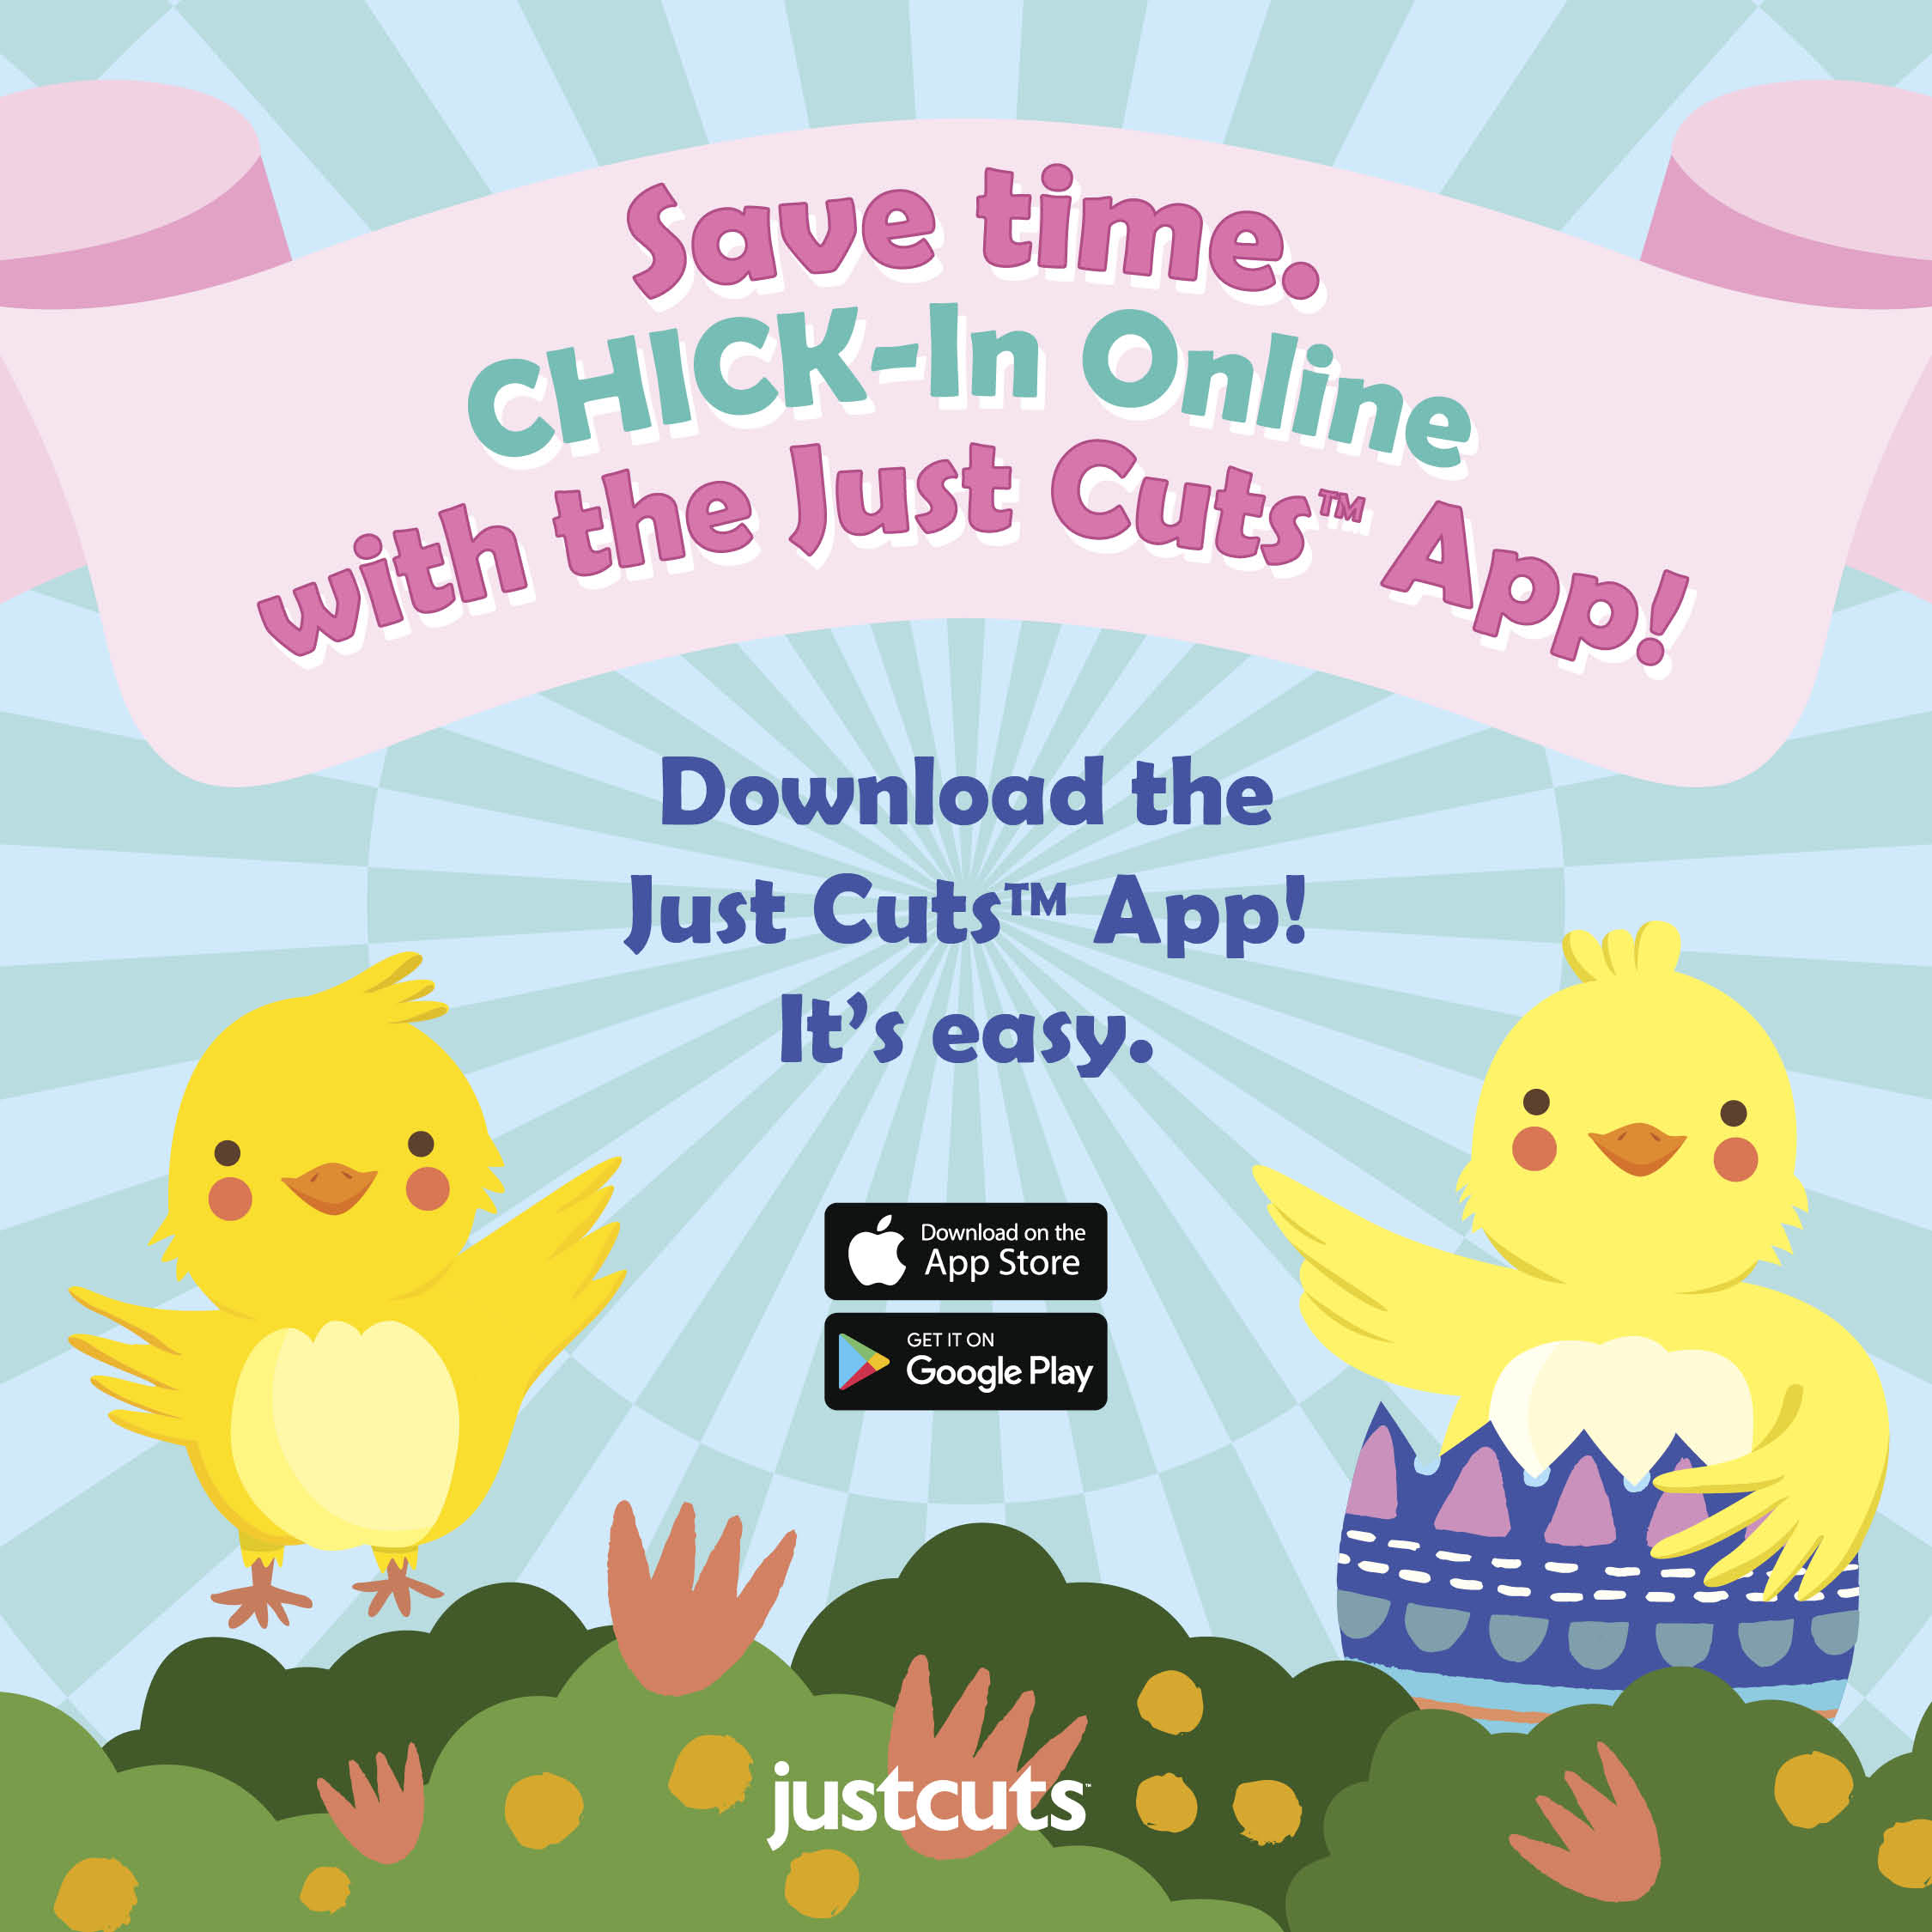 Your Just Cuts EGG-xperience just got even cuter!